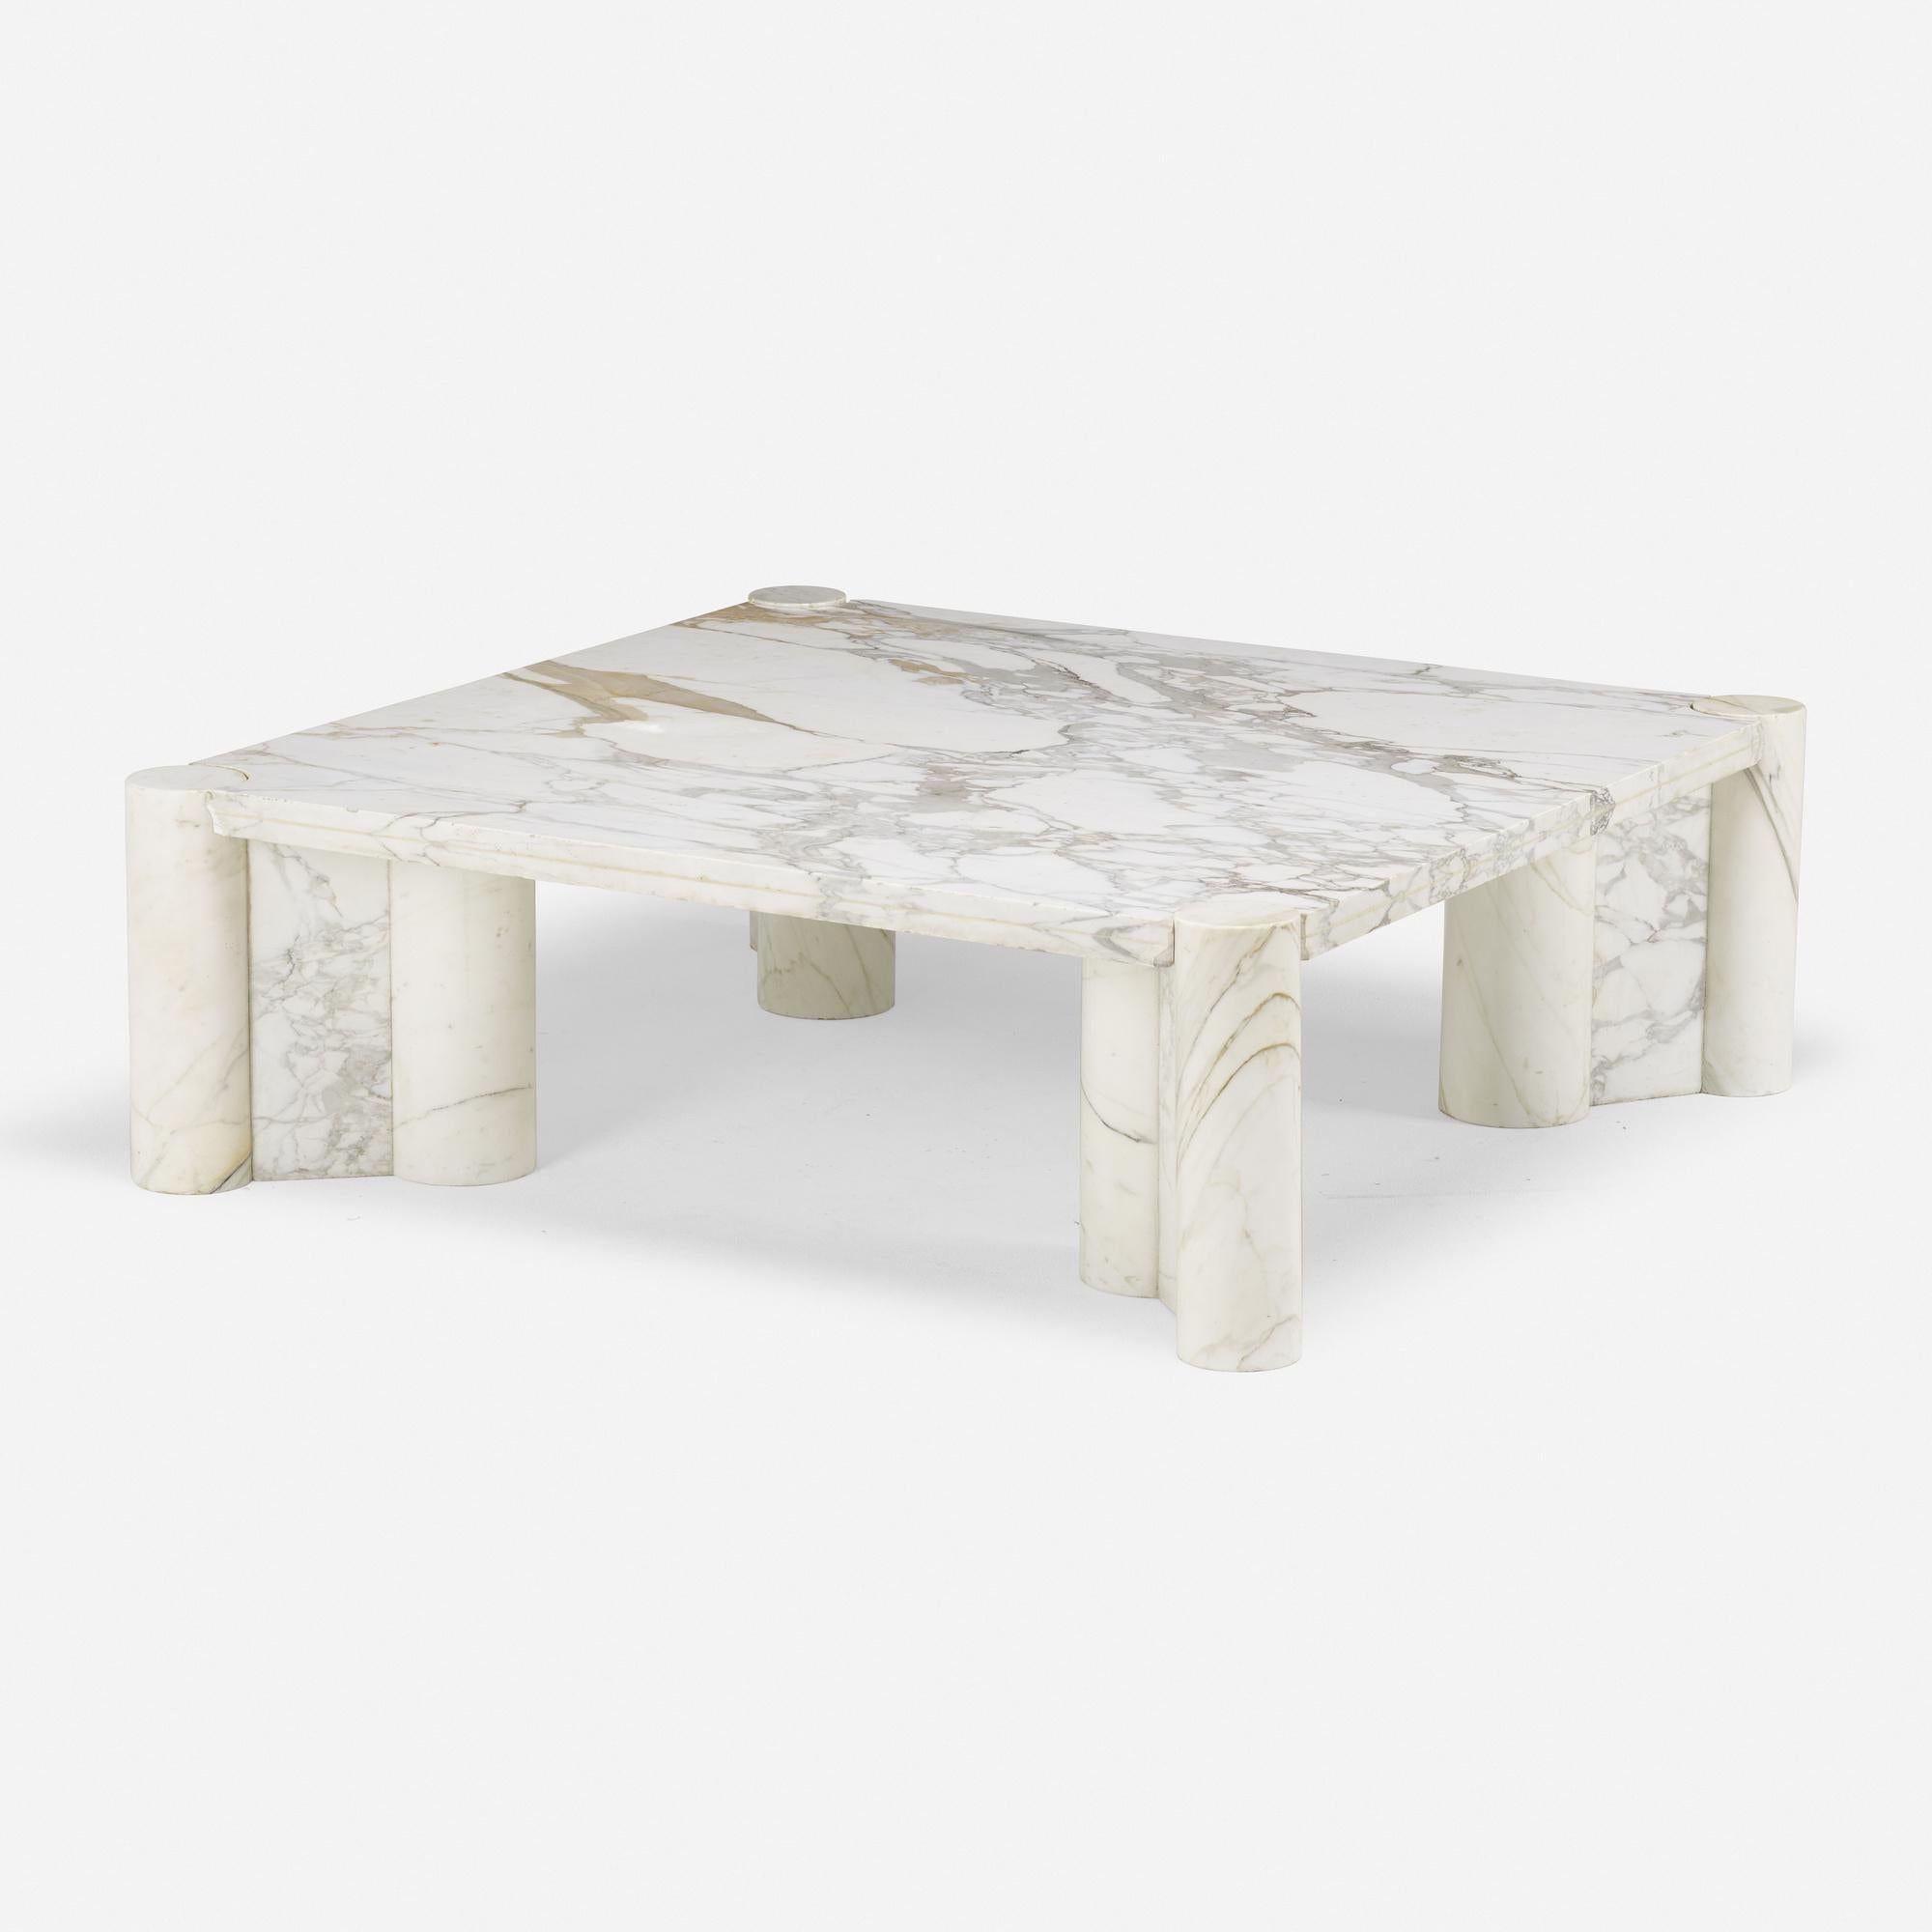 Gae Aulenti 'Jumbo' coffee table. Carved of polished Calacatta Gold marble. Designed in 1964 and made by Knoll. Features cluster legs and is known for its graceful forms and opulent strength. Wear consistent with use over time, including several